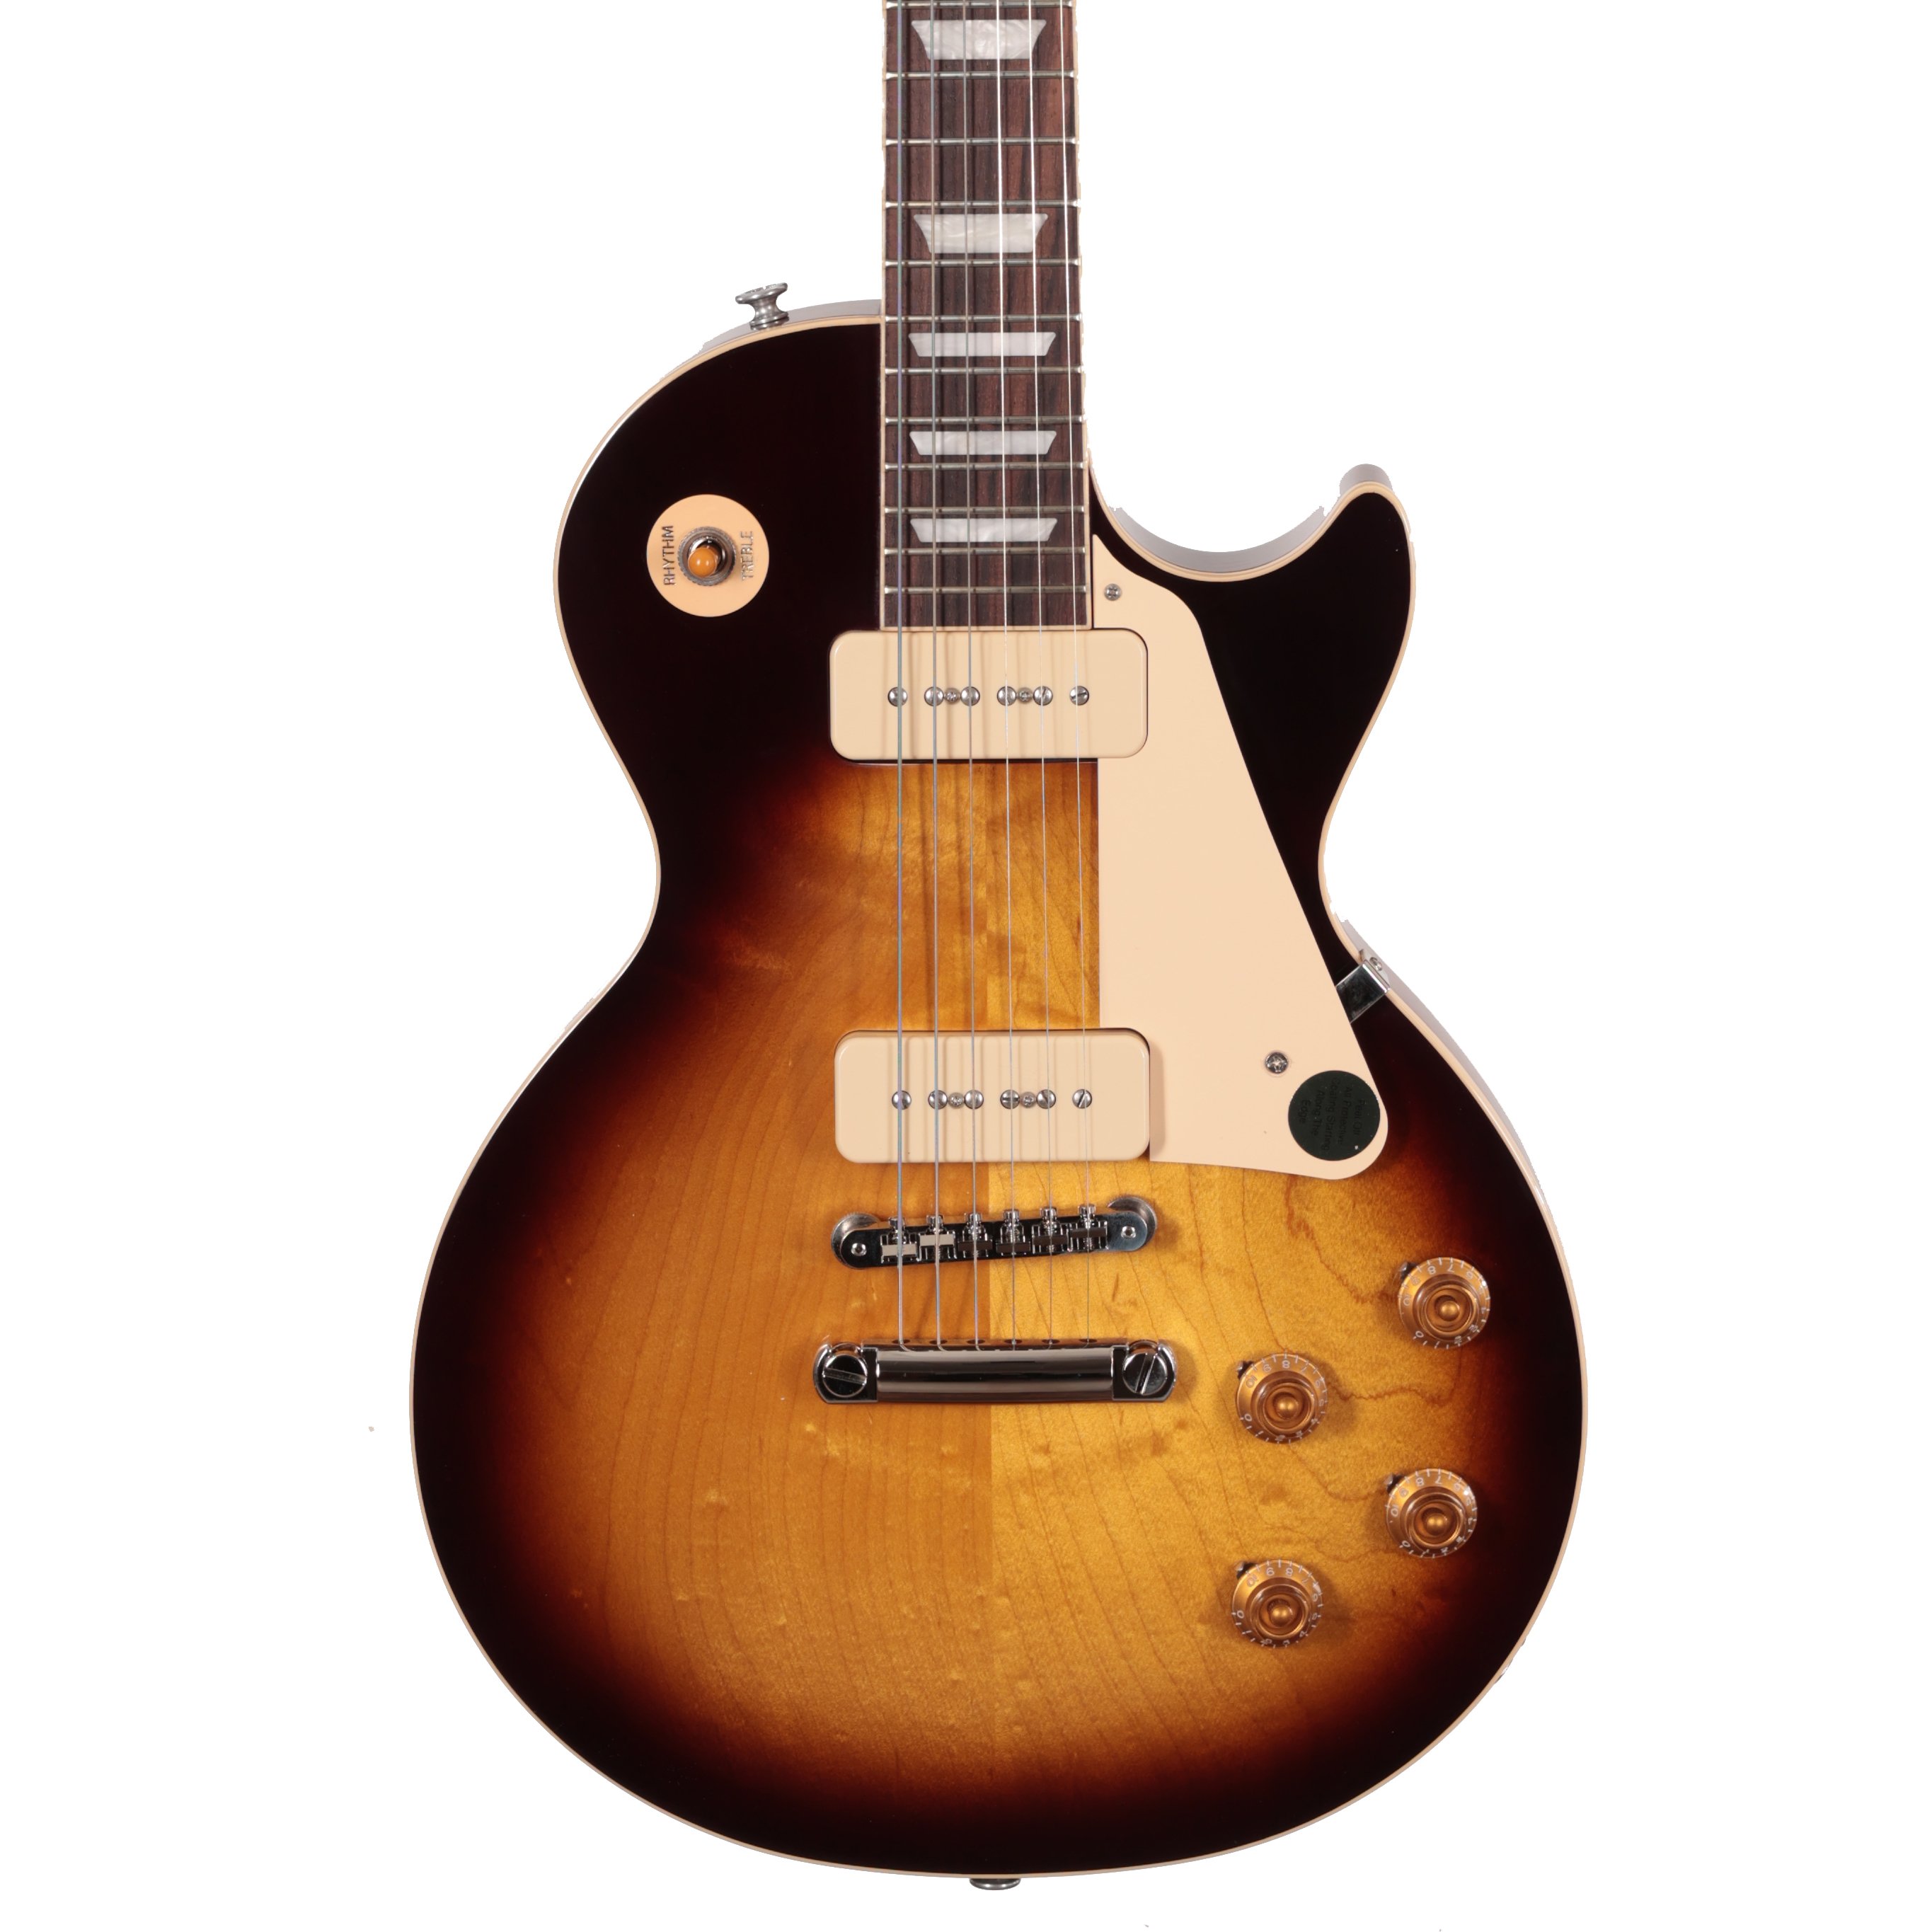 Gibson USA Les Paul Standard '50s P90 Electric Guitar in Tobacco Burst